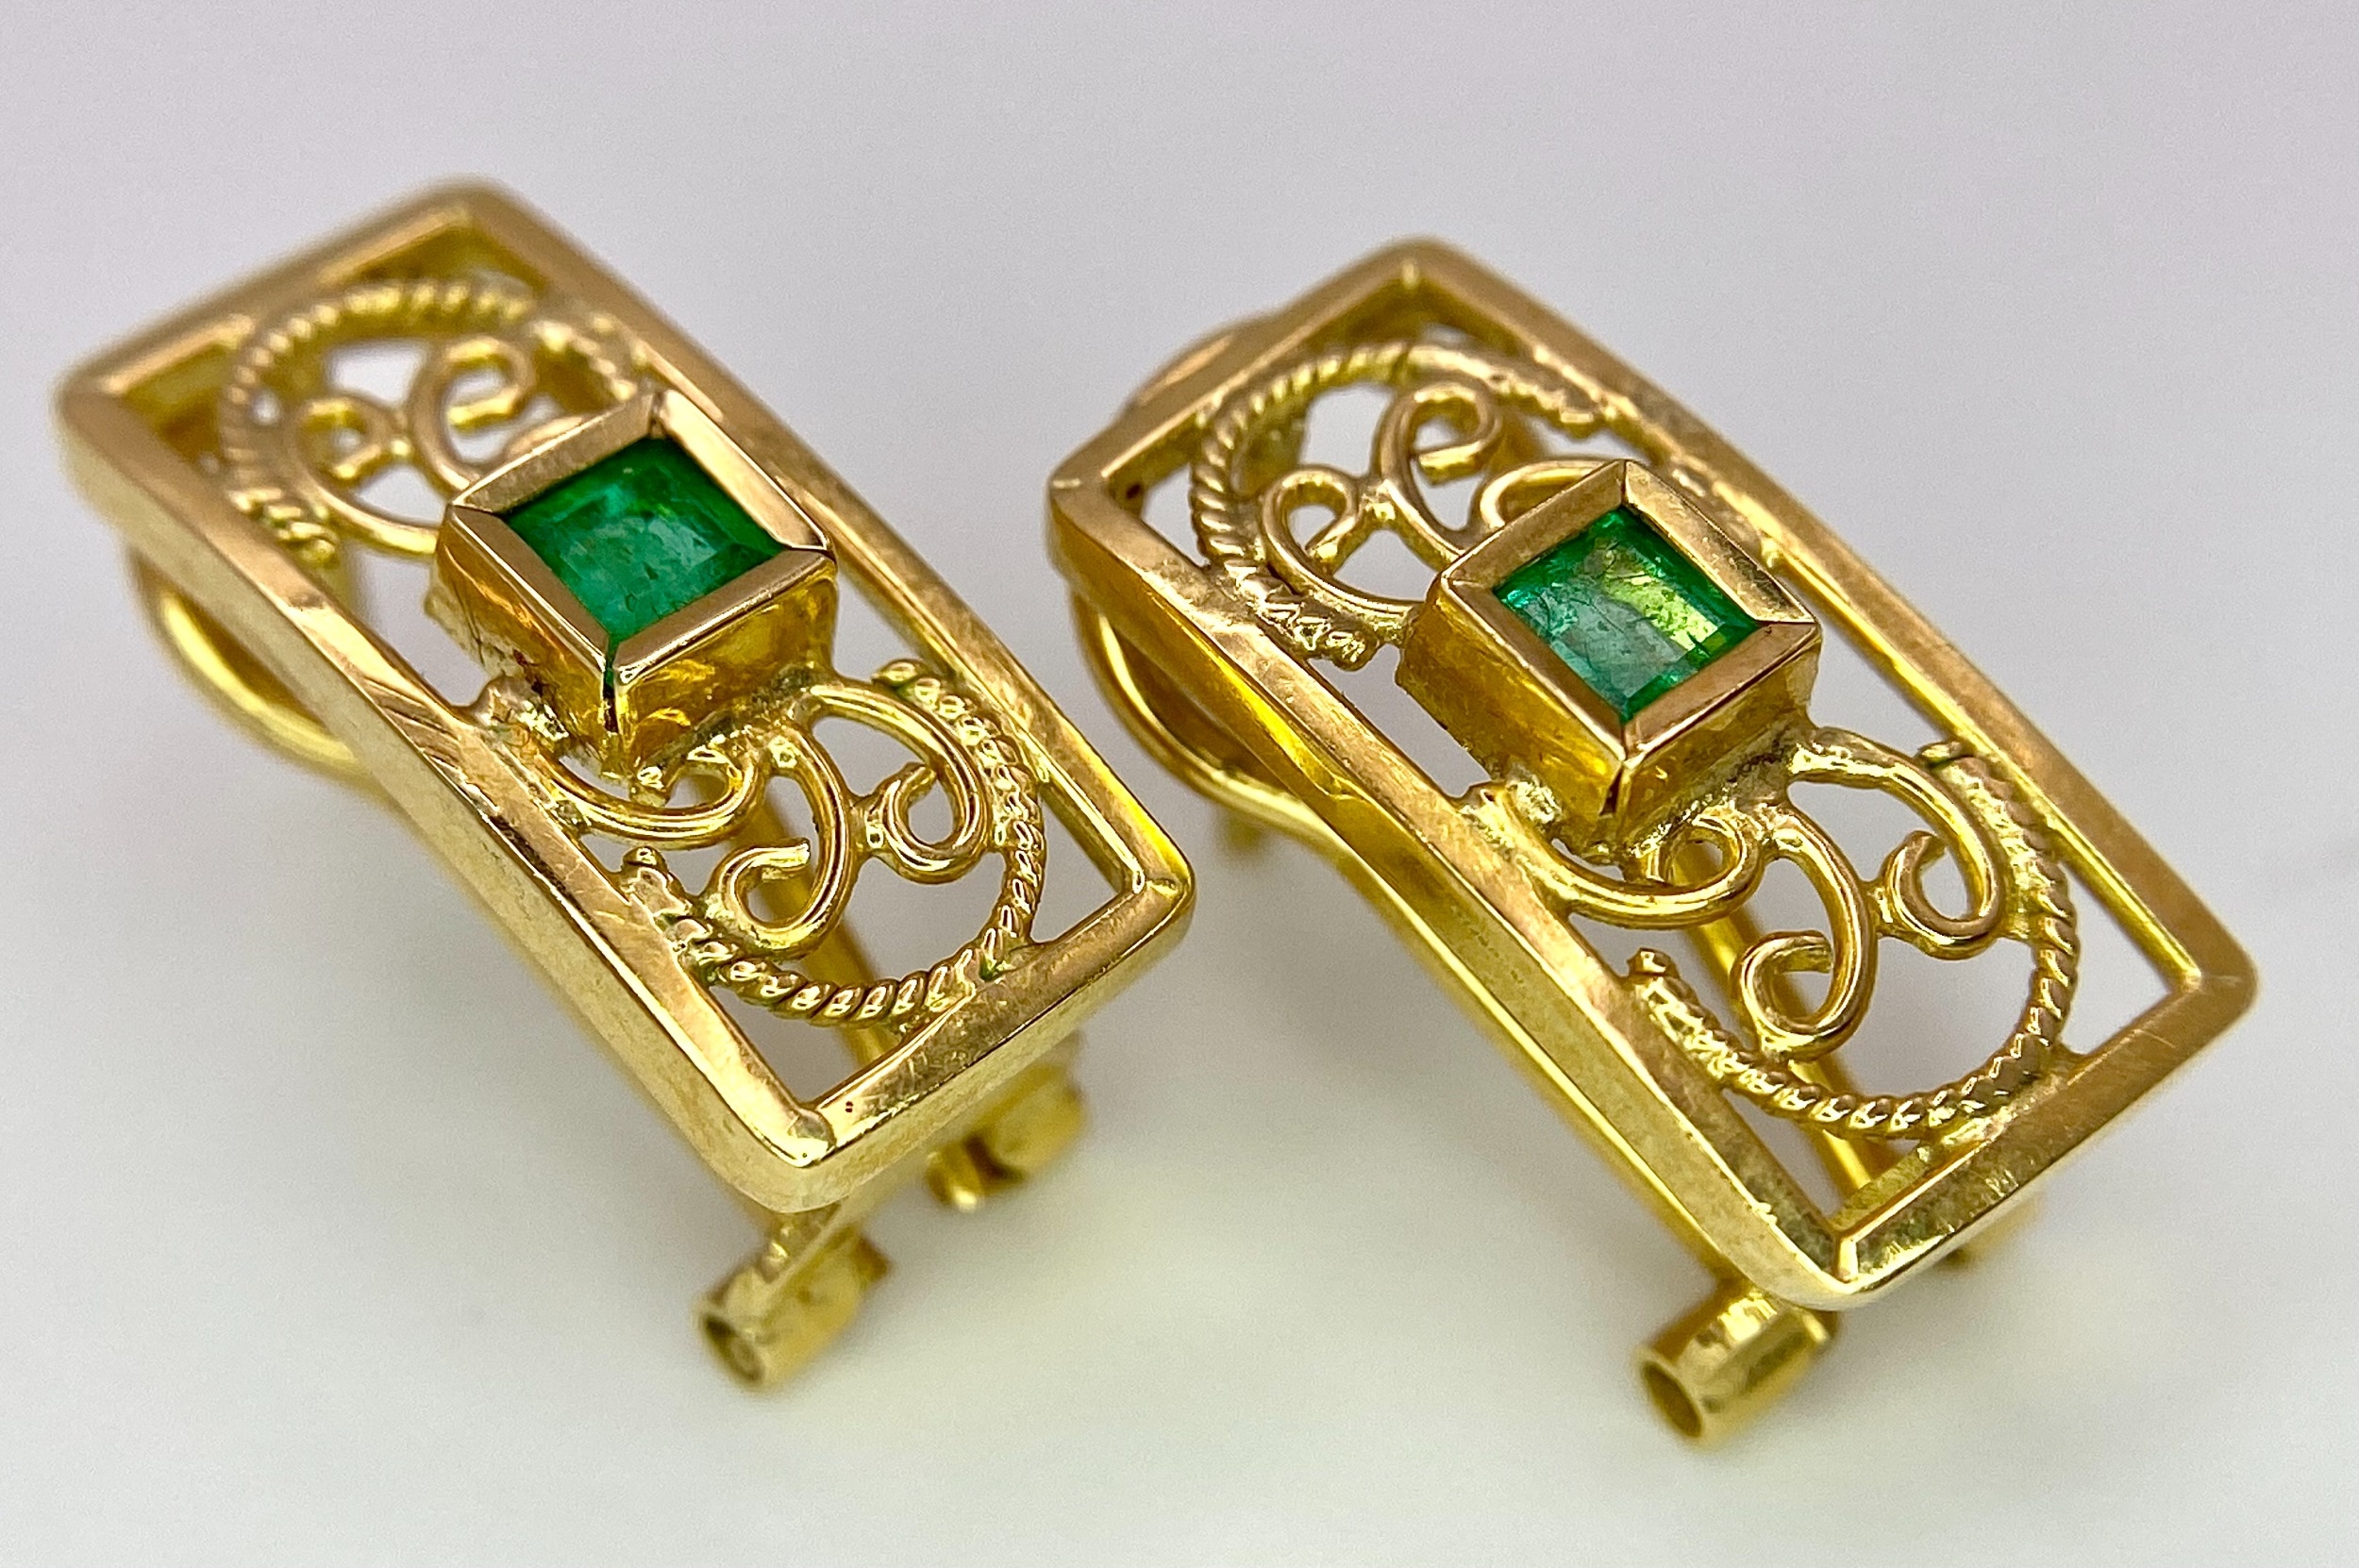 A Pair of 18K Yellow Gold and Emerald Earrings. Clip clasp with pierced decoration. 17mm. 3.9g total - Image 2 of 7